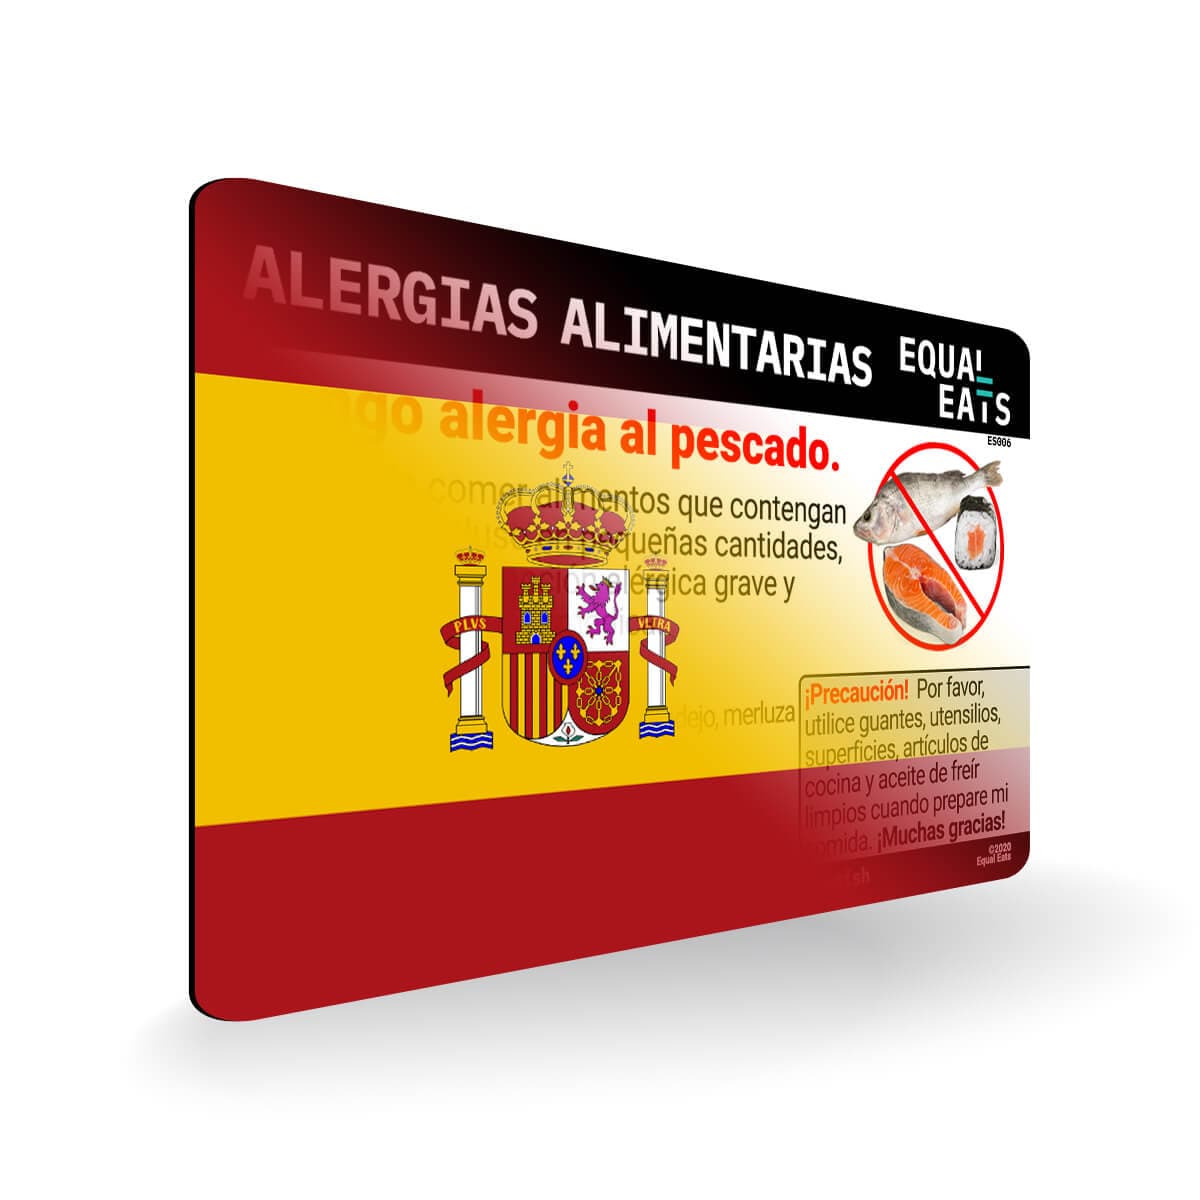 Fish Allergy in Spanish. Fish Allergy Card for Spain